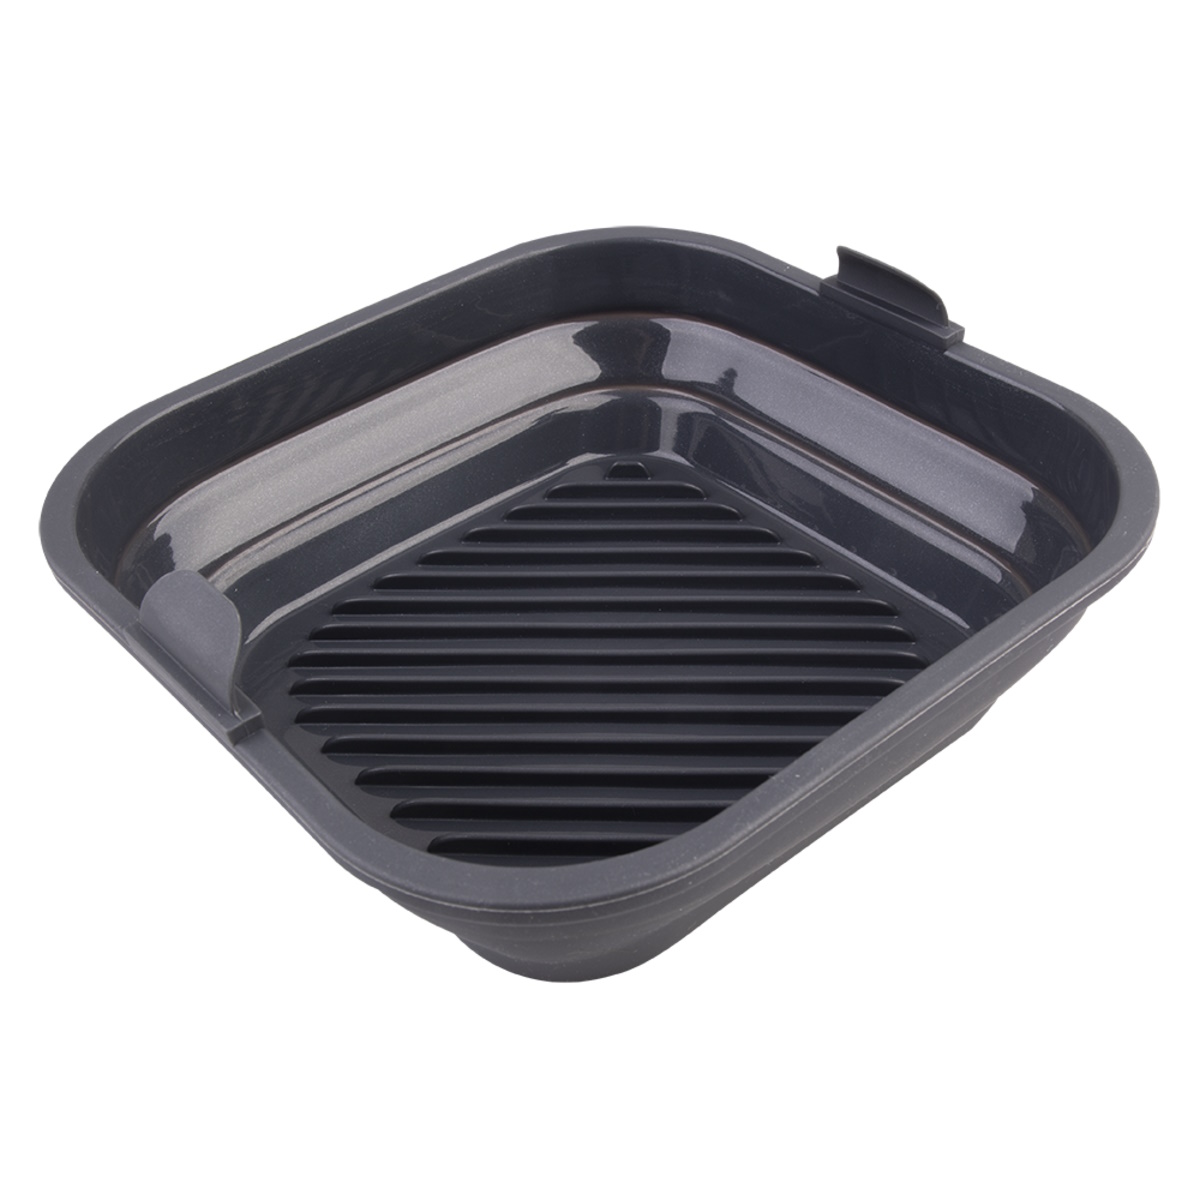 Silicone Square Collapsible Air Fryer Basket 22cm Dia. (charcoal)